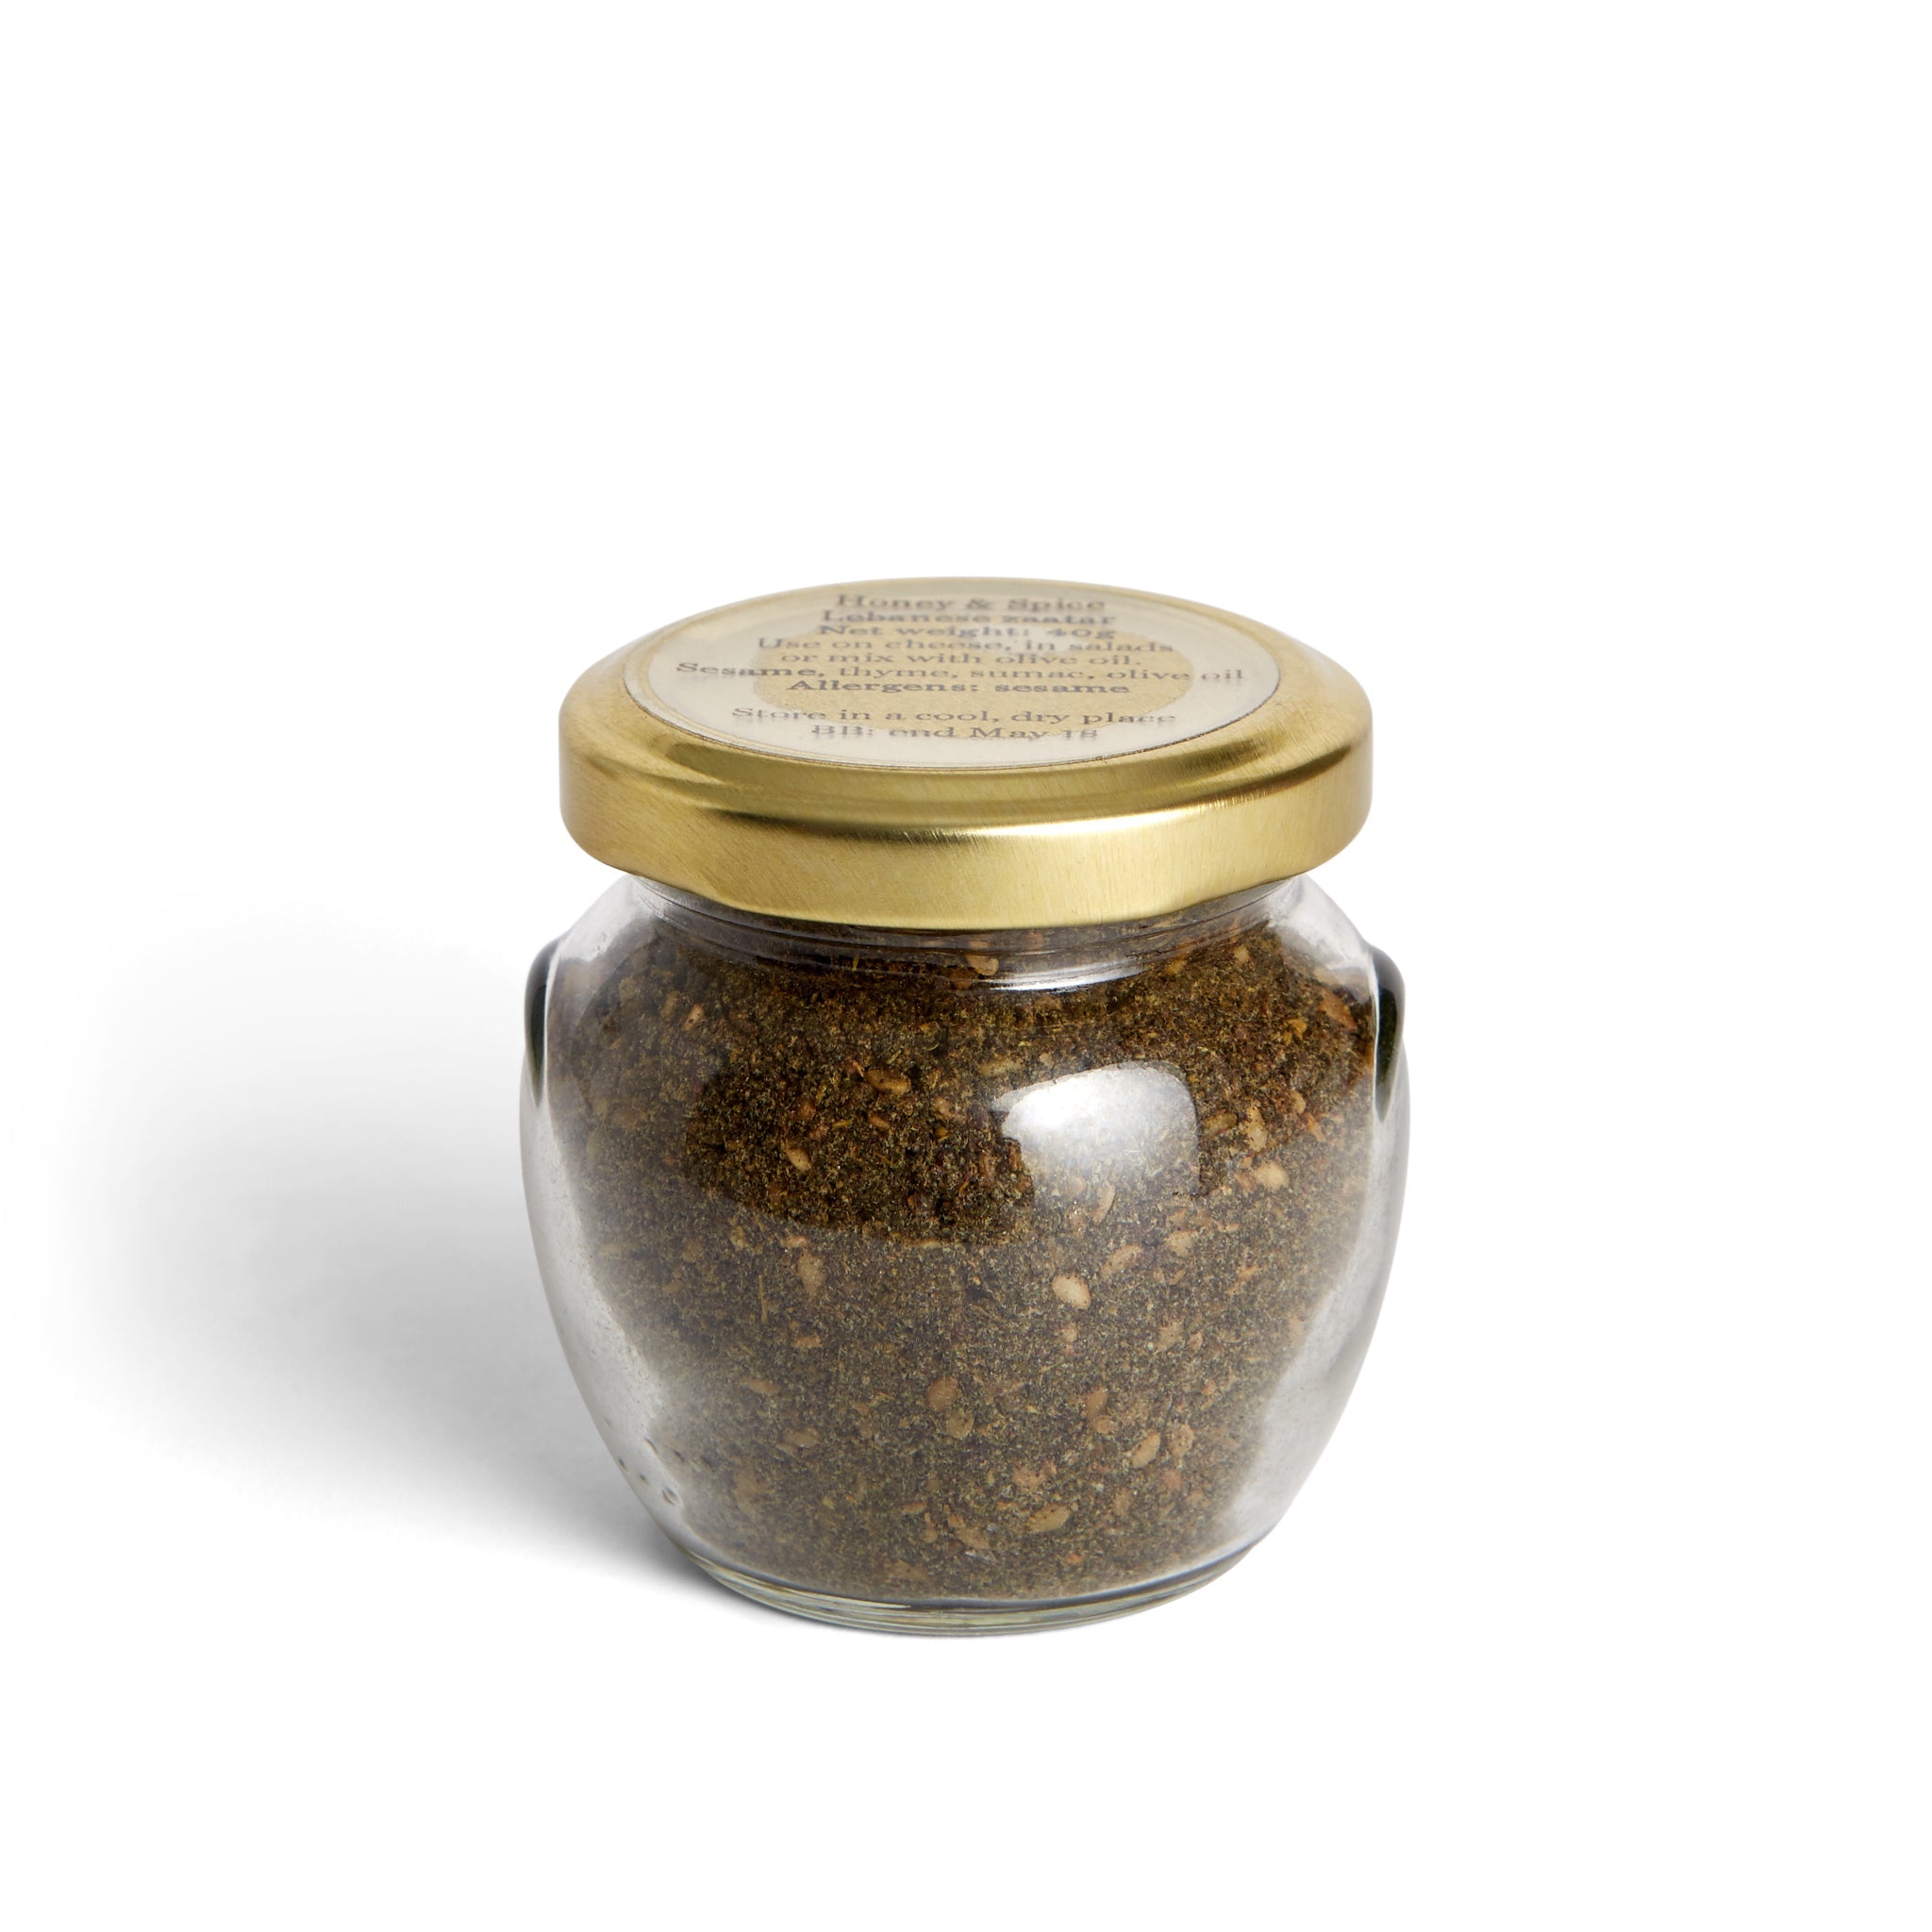 Whole Spices & Spice Blends - Honey & Spice